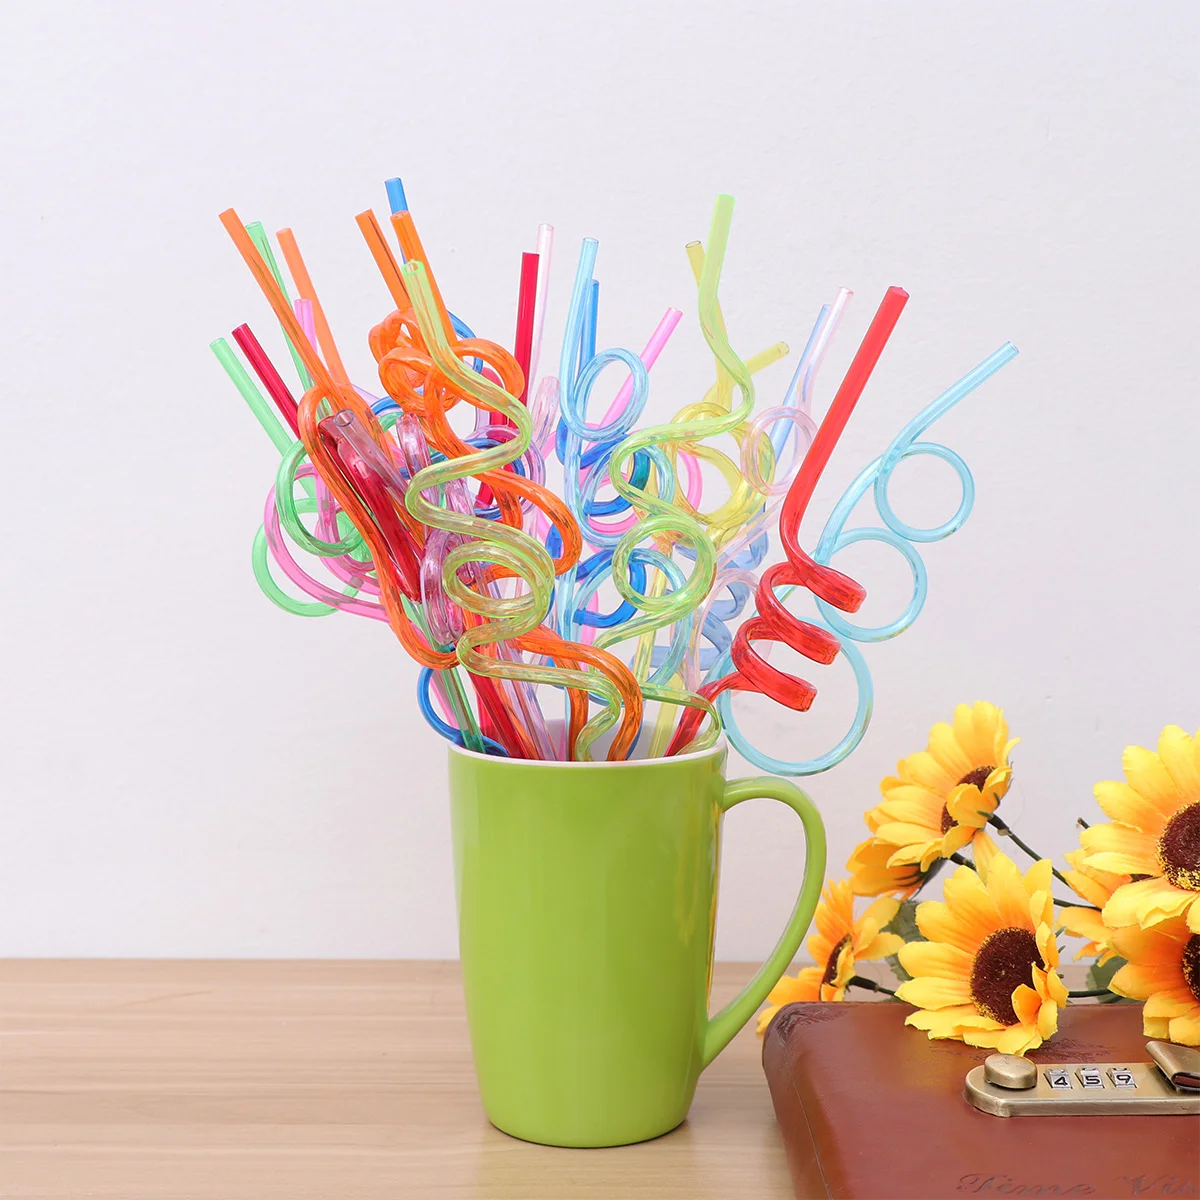 

24 Pcs Straws Drinking Straws Disposable Drinking Pipettes Recyclable Straws Drinking Straws Drinking Pipettes